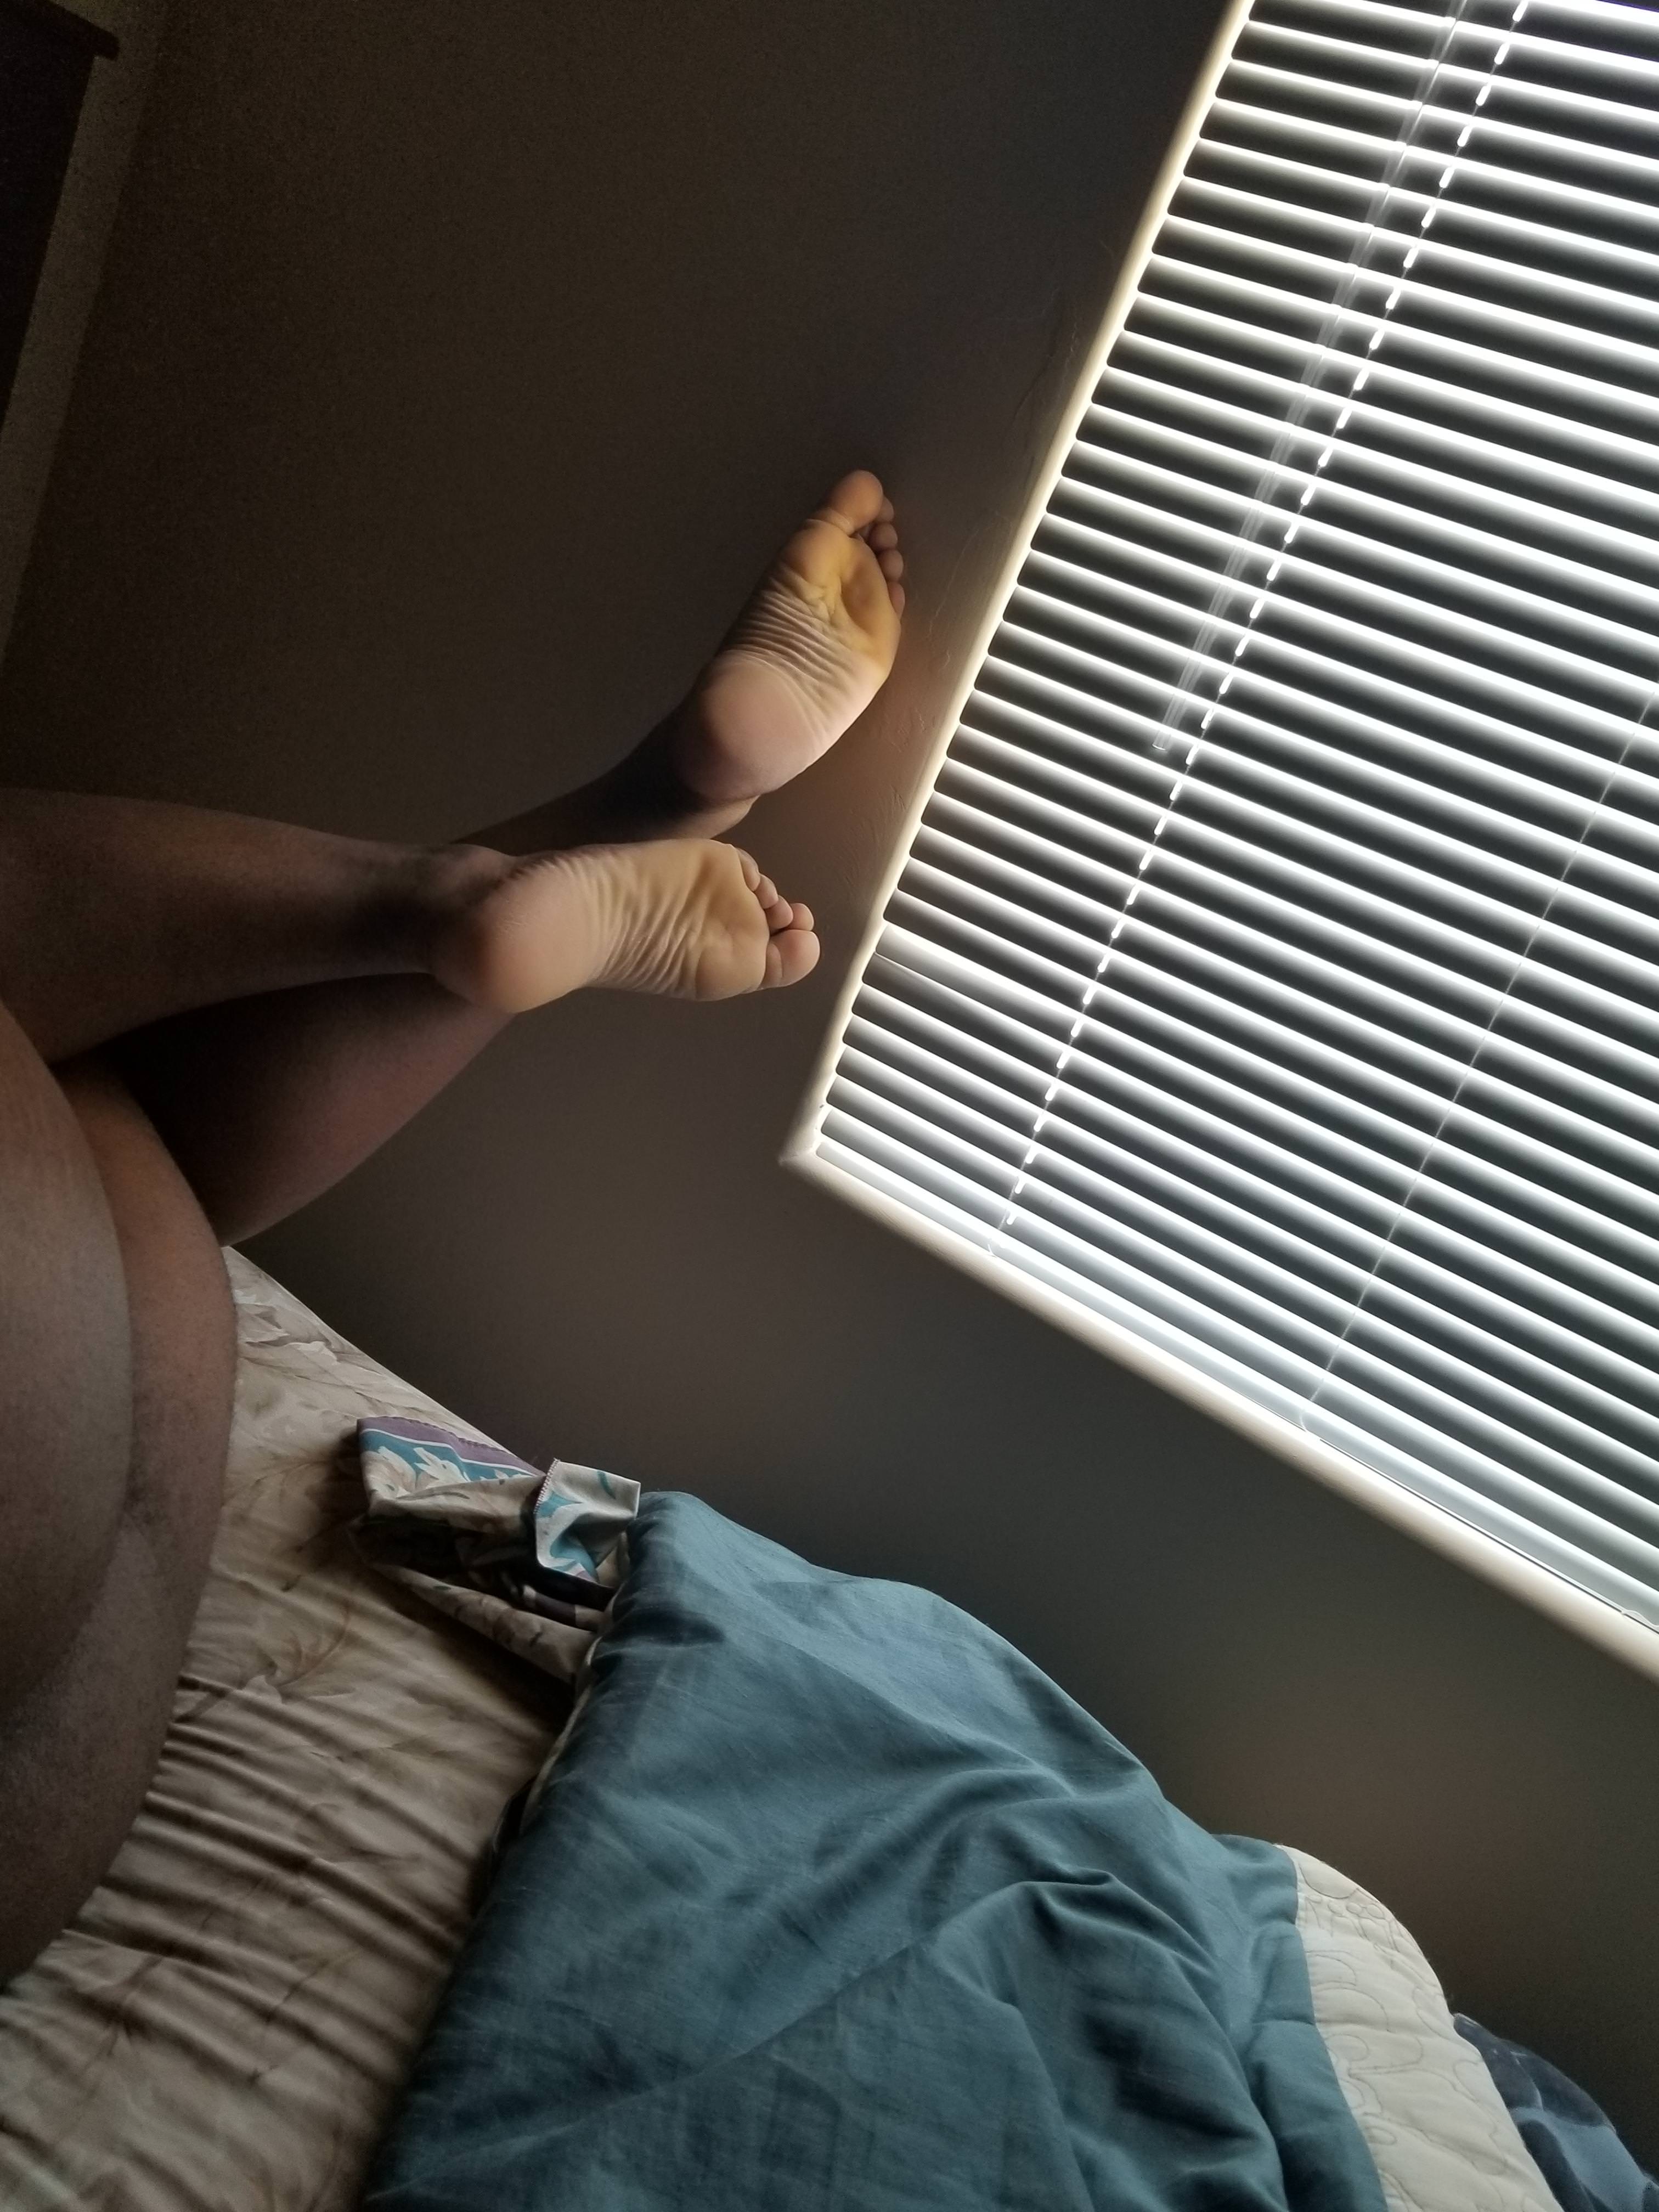 My soles ? (hopefully this looks more artsy than pretentious) | Voet aanbidding  Porno | Hot XXX Gays